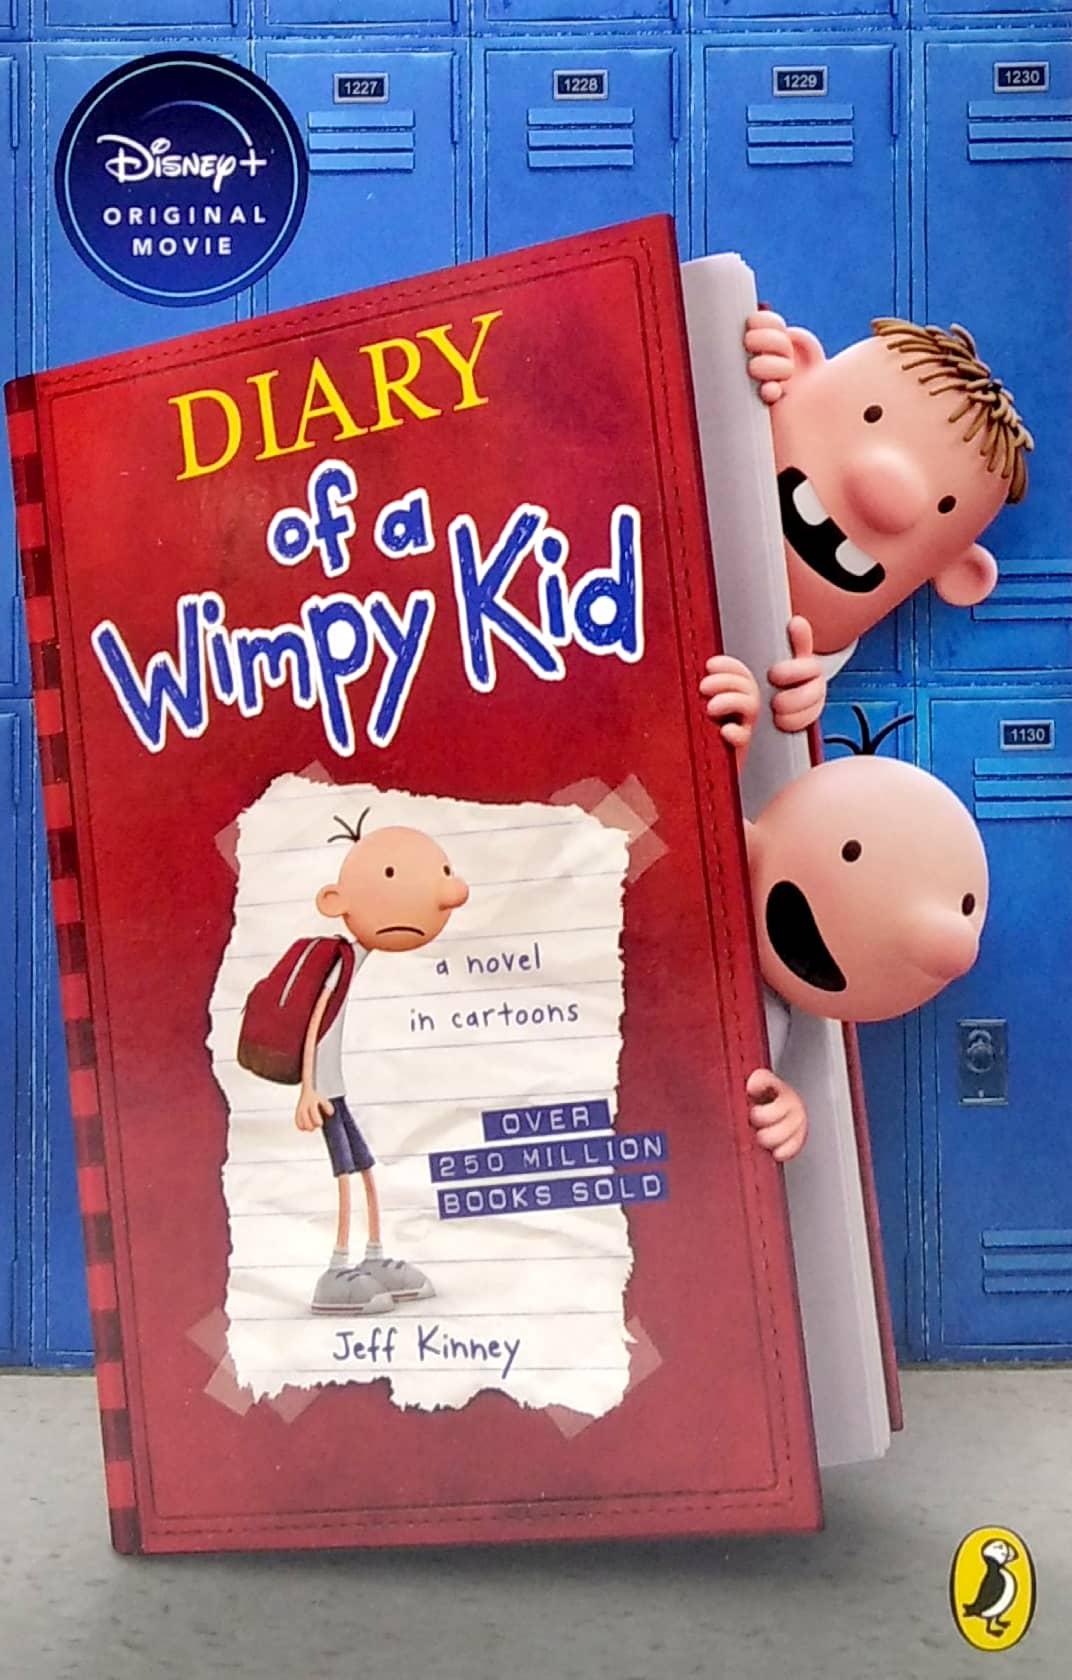 Diary Of A Wimpy Kid (Book 1) : Special Disney + Cover Edition